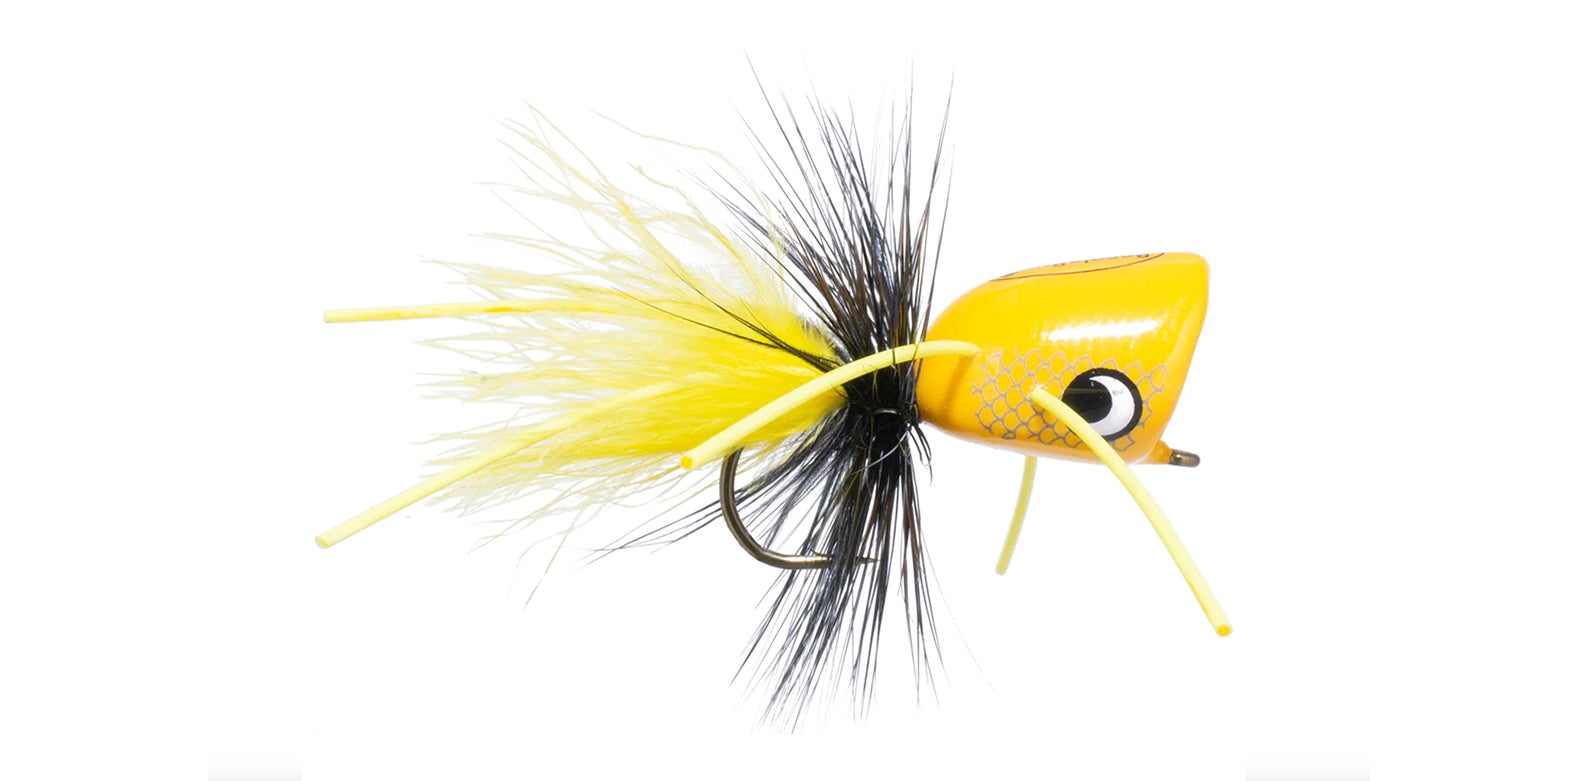 Unbranded Striped Bass Fly Fishing Baits, Lures & Flies for sale